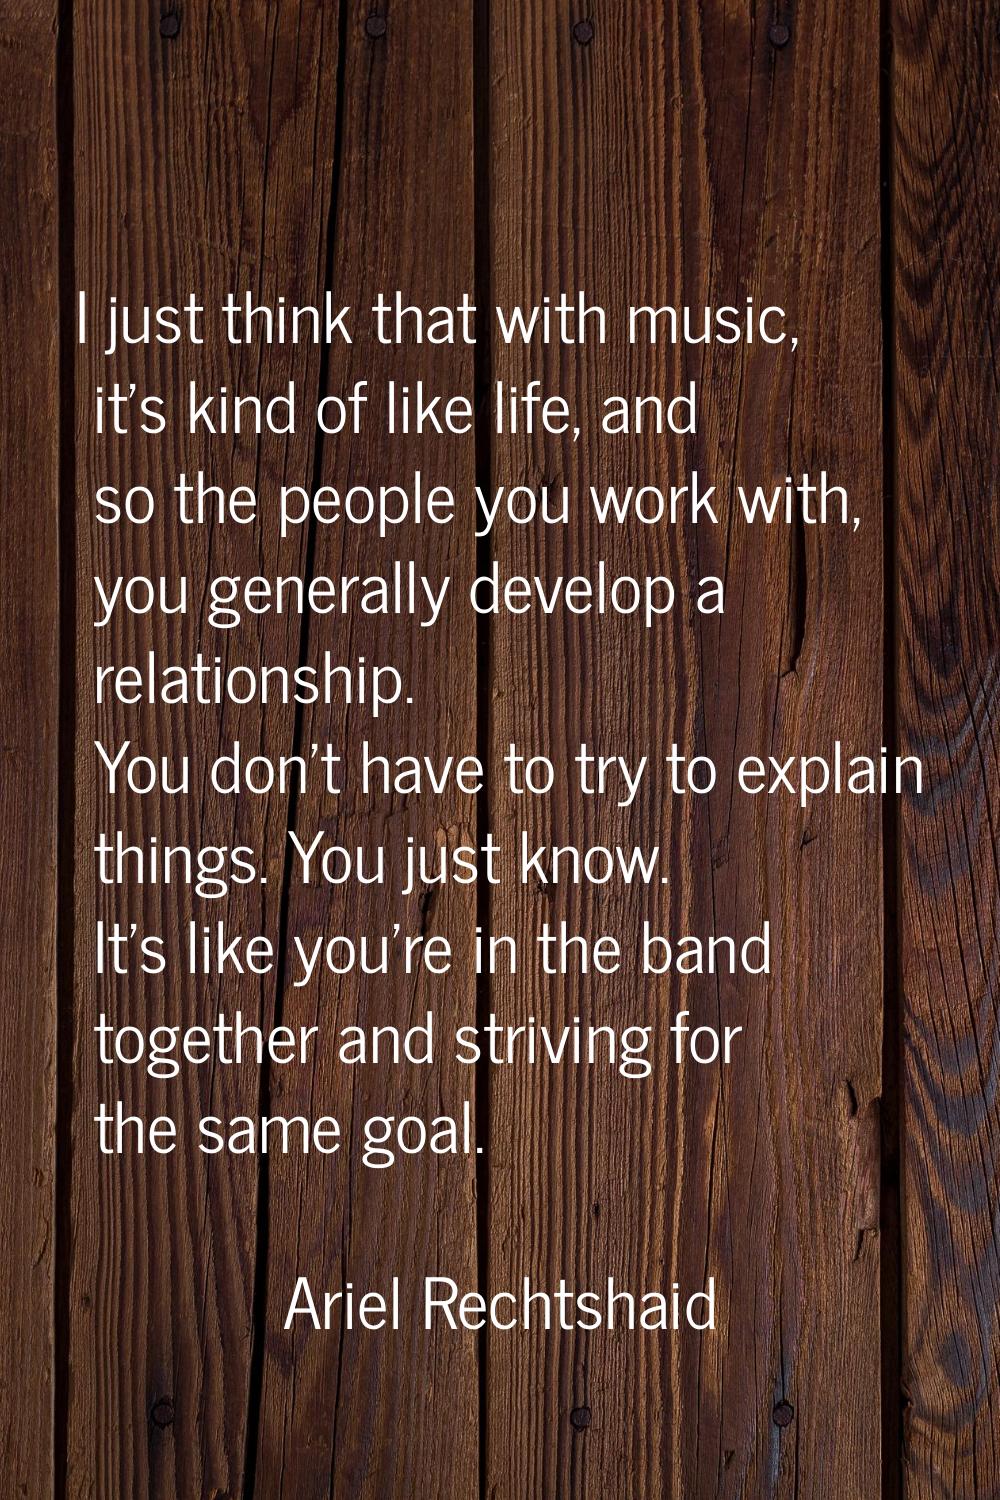 I just think that with music, it's kind of like life, and so the people you work with, you generall